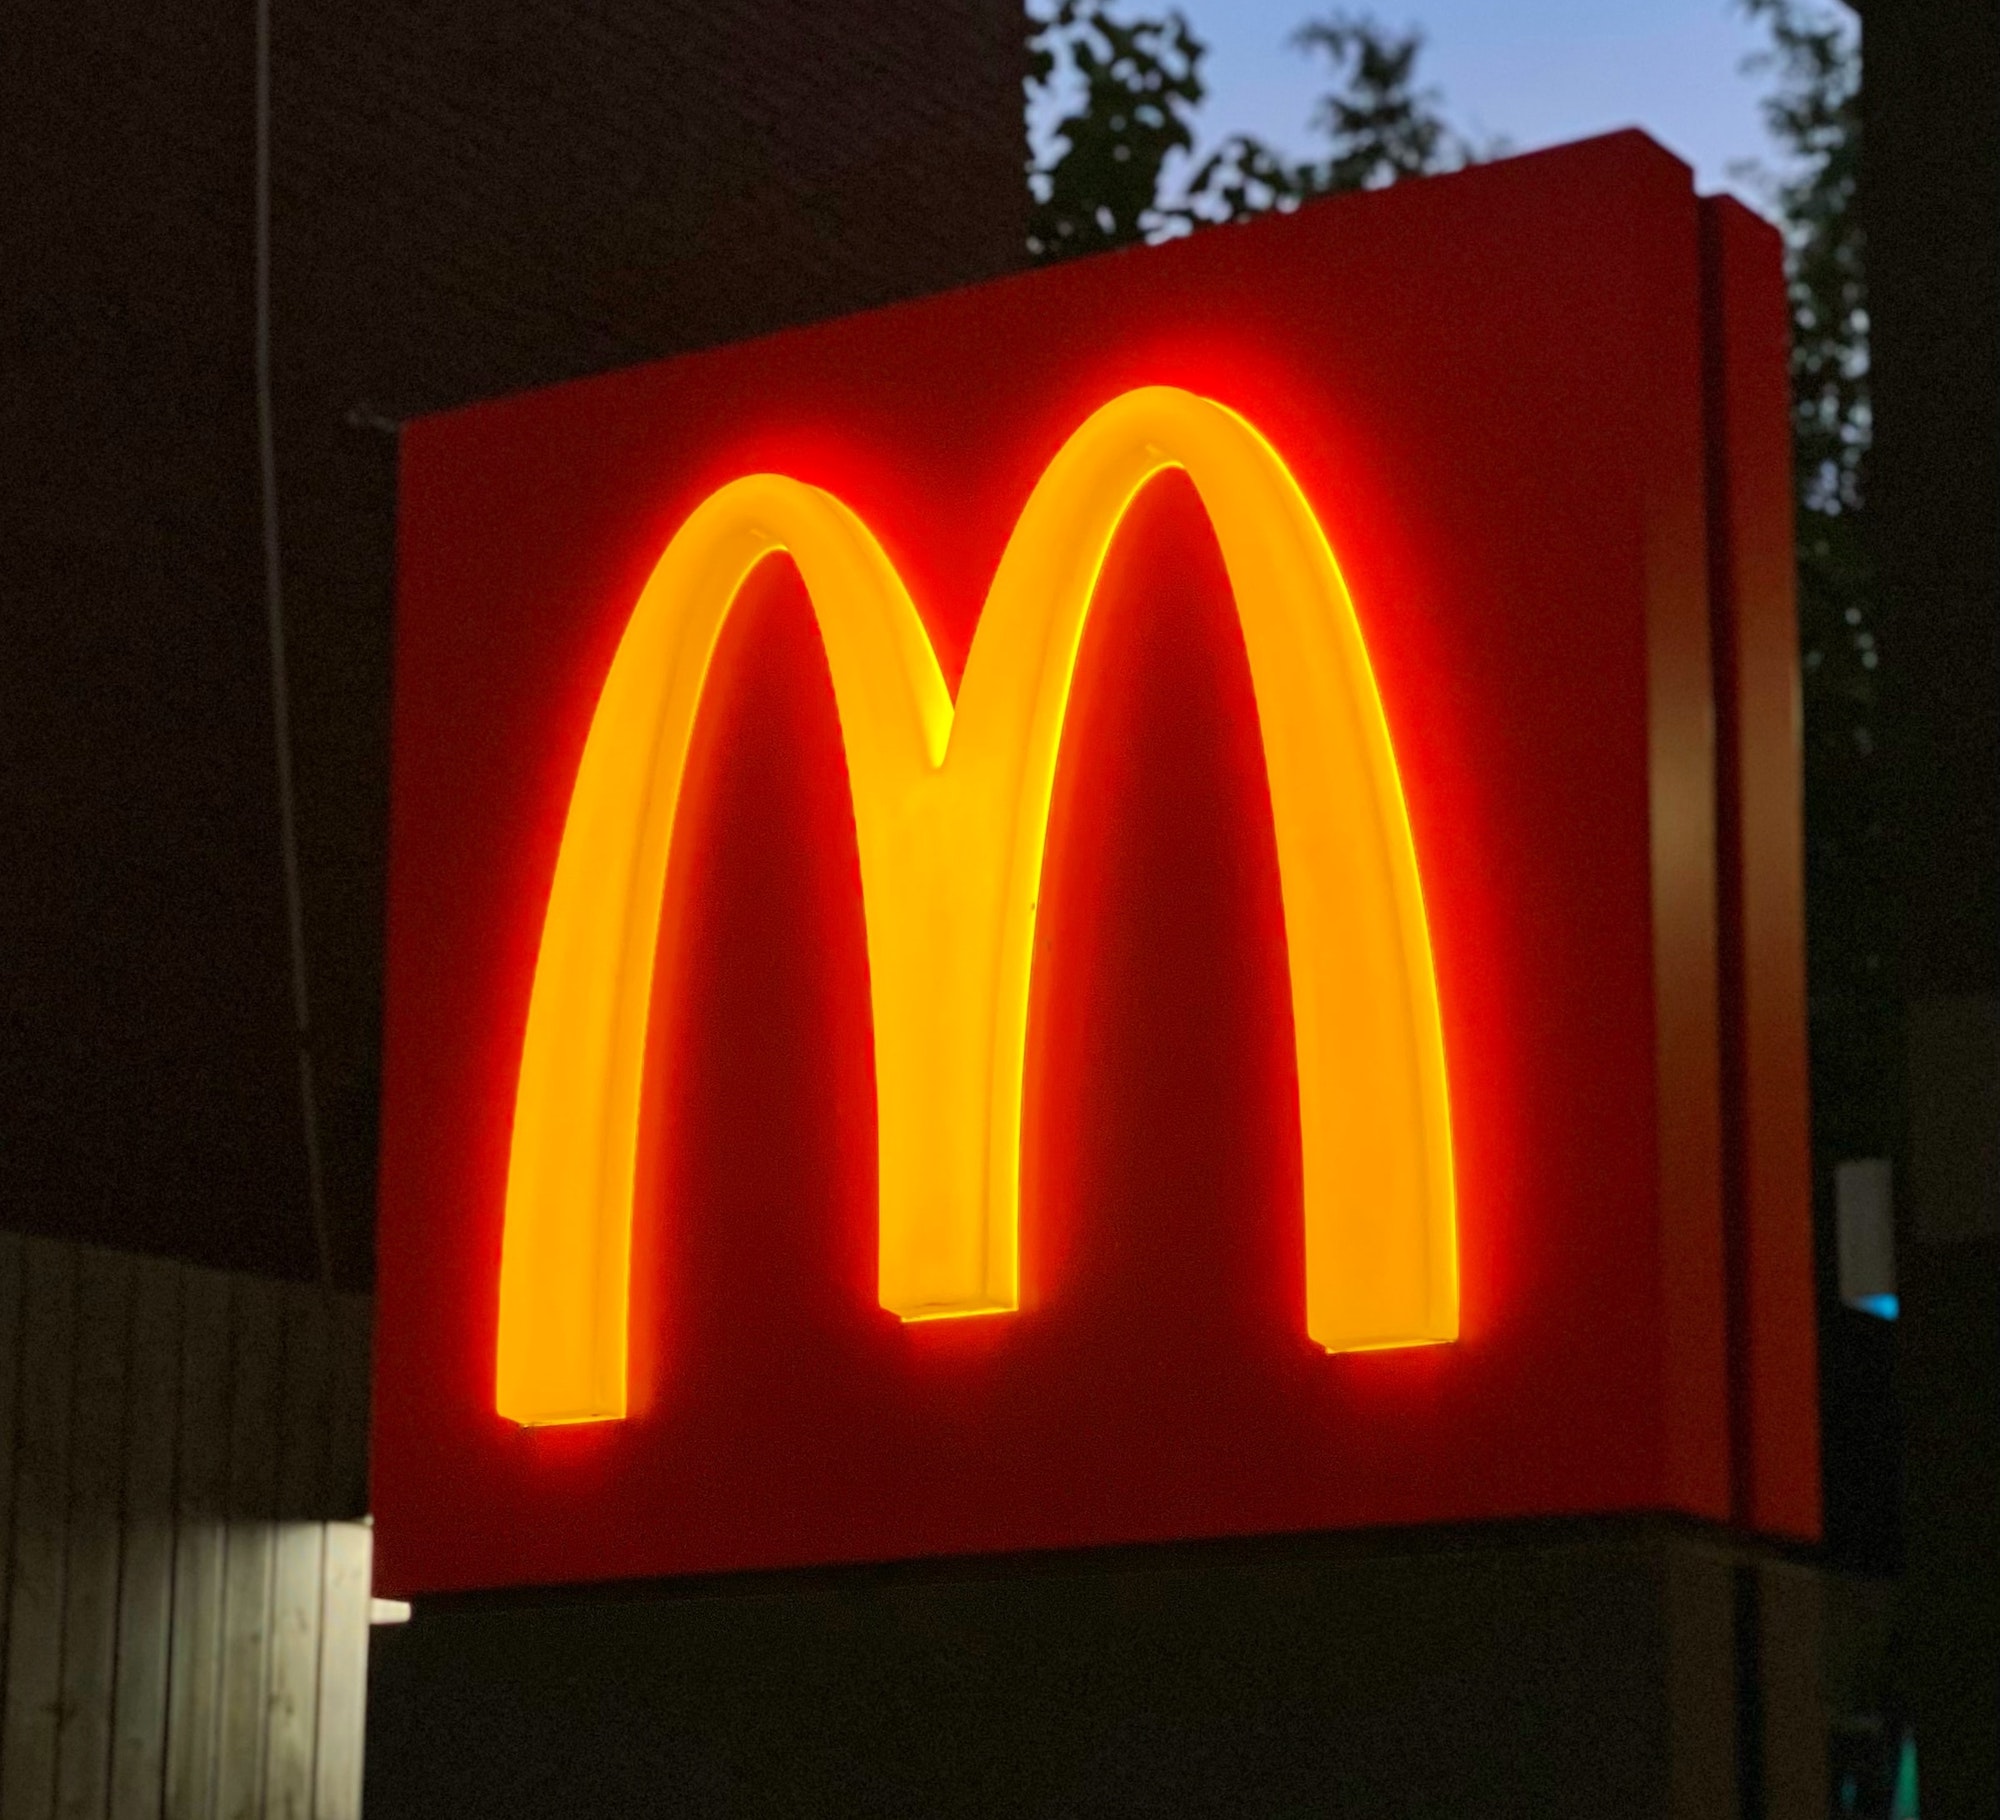 Plans lodged for McDonald's drive-thru in Ellon